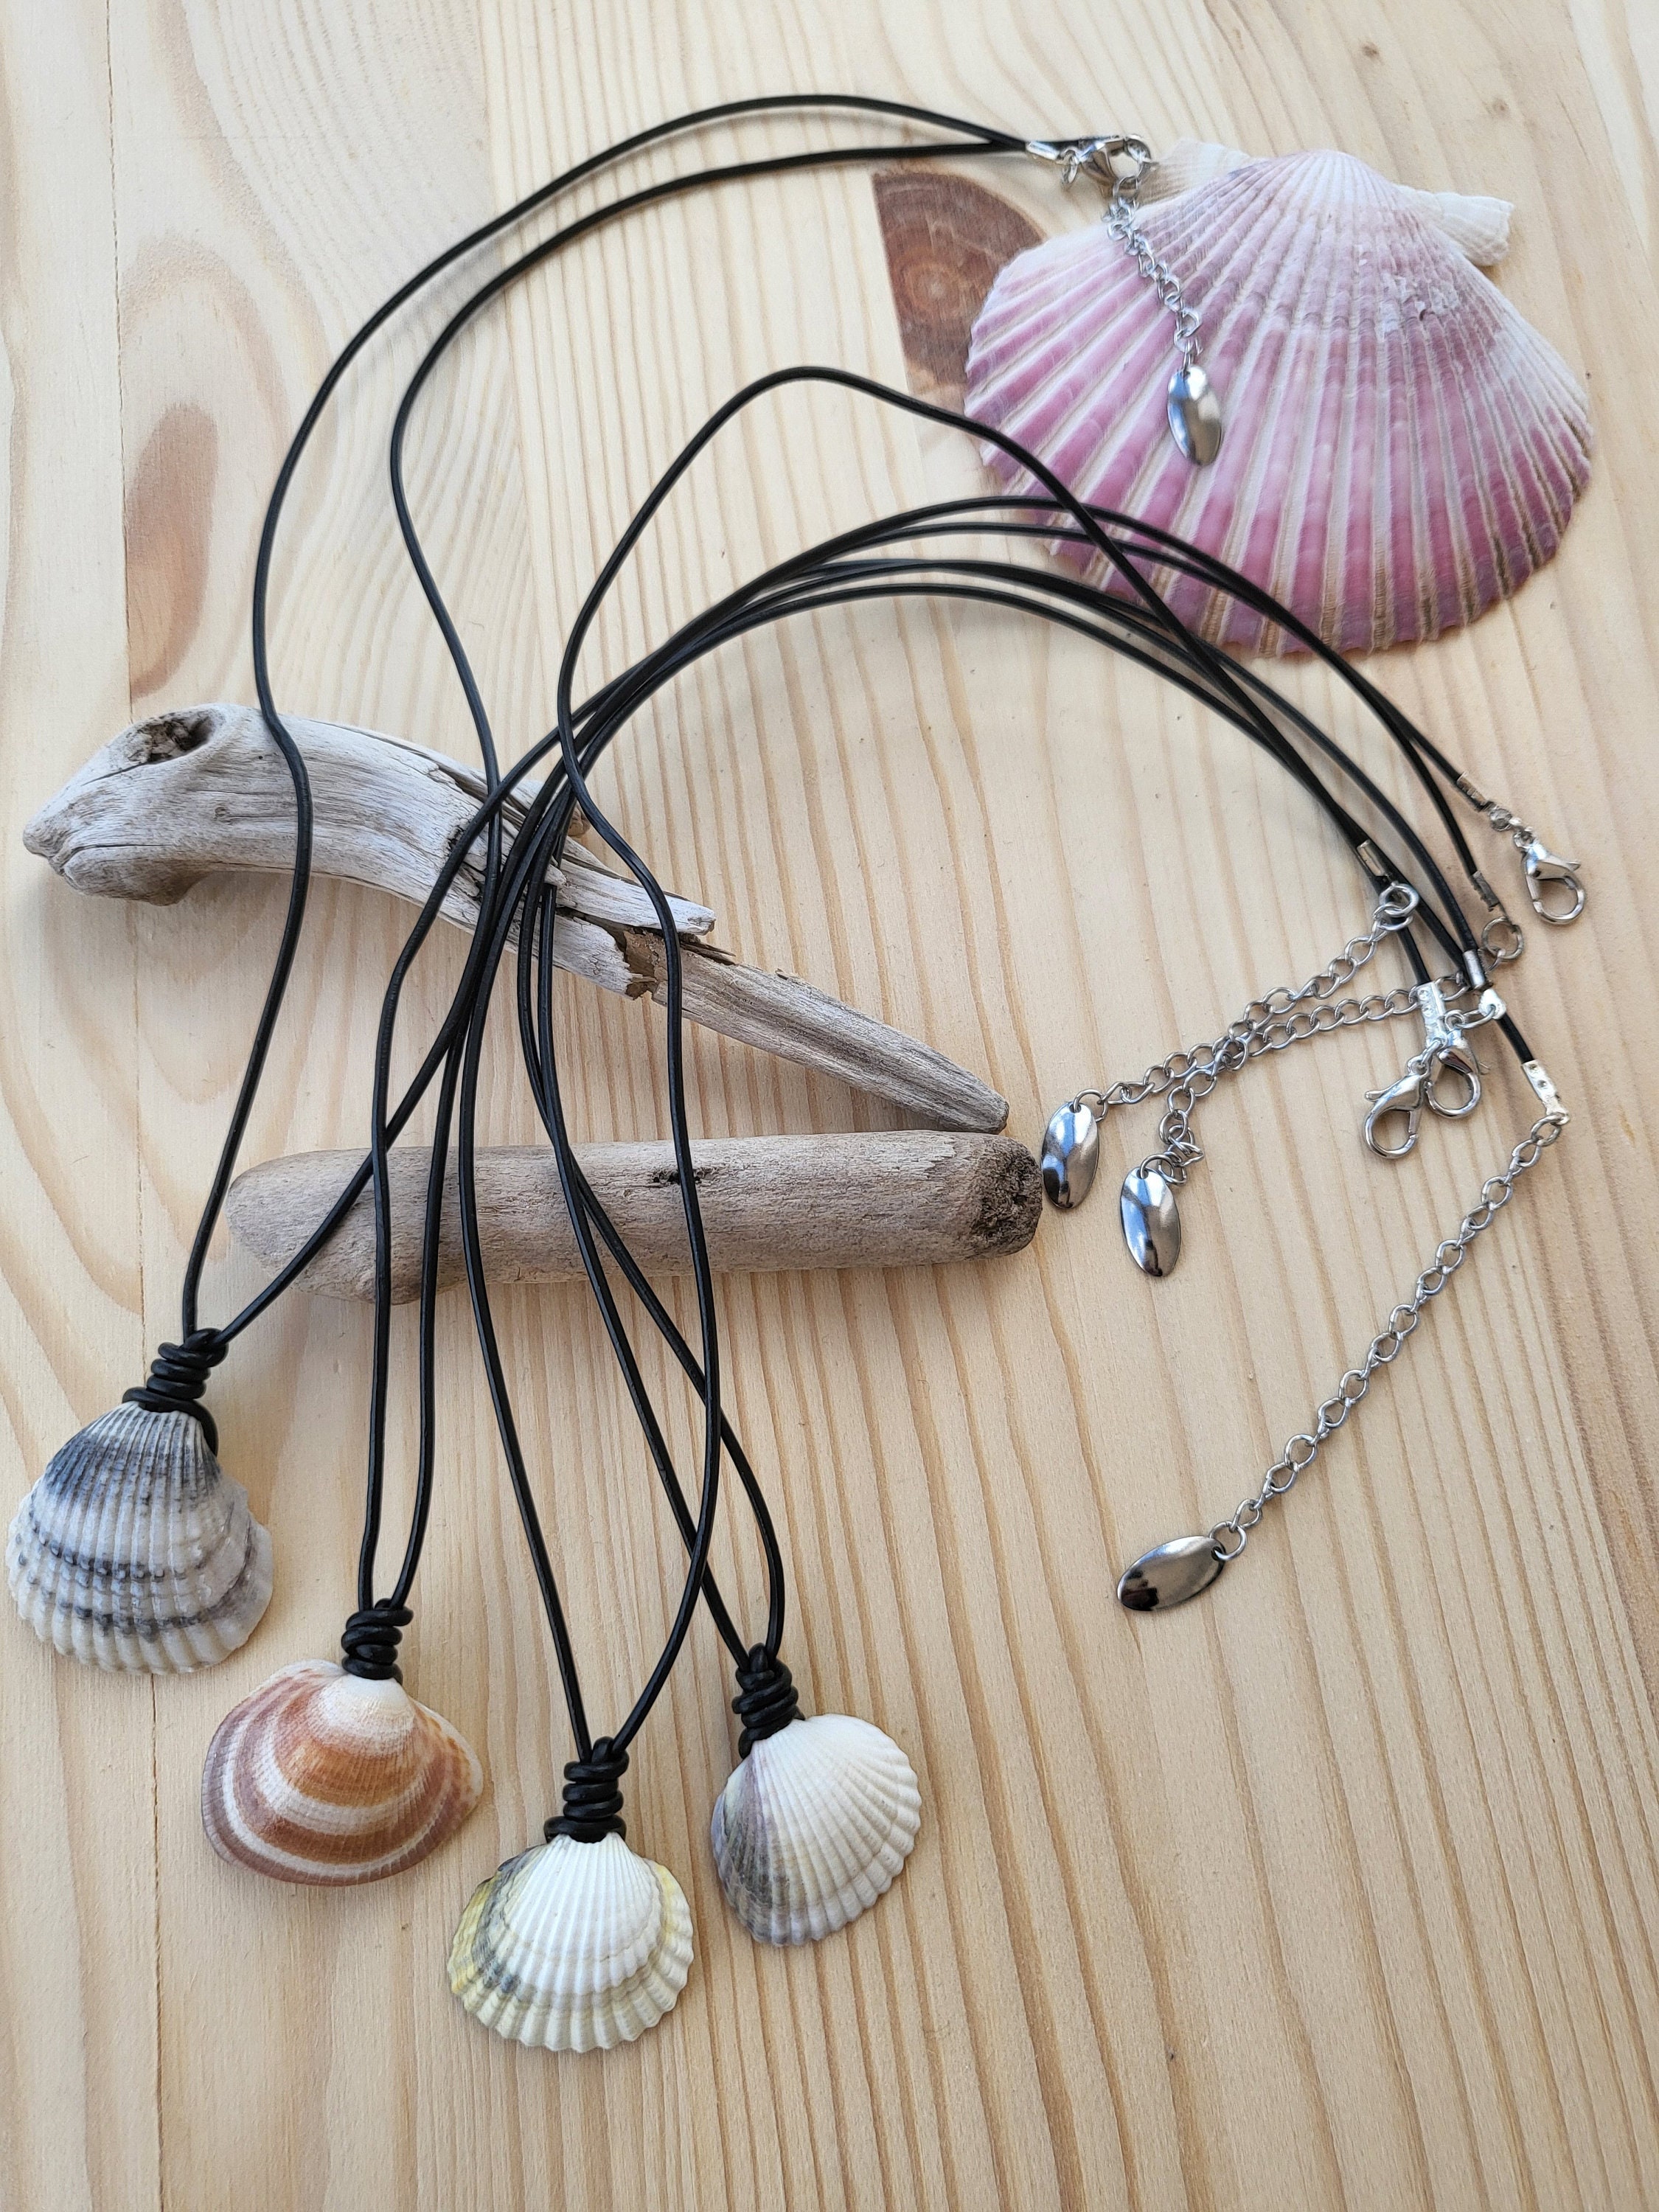 Sea Shell Necklaces Necklace Making Supplies Sea Shells